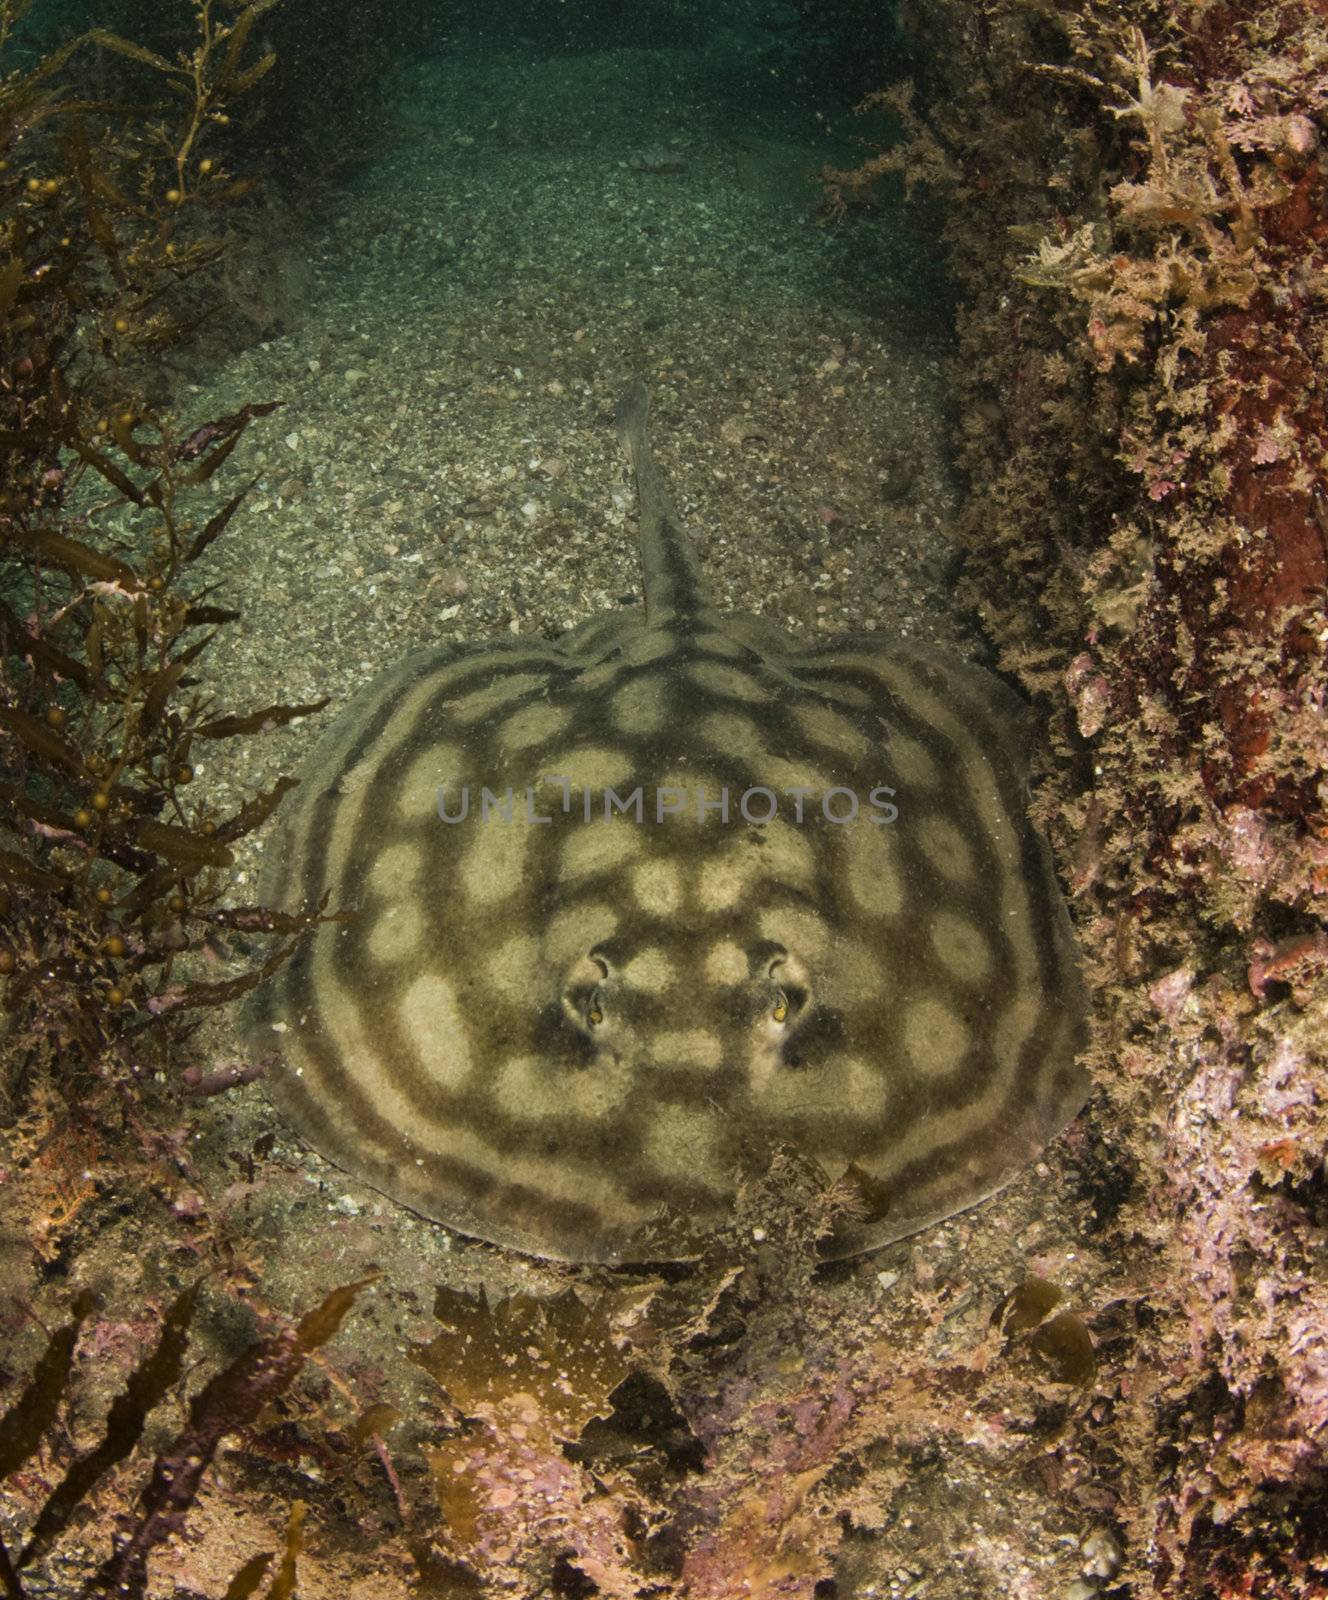 A Bullseye Stingray (Urobatis concentricus) in the sand underwater in th Sea of Cortez, Mexico